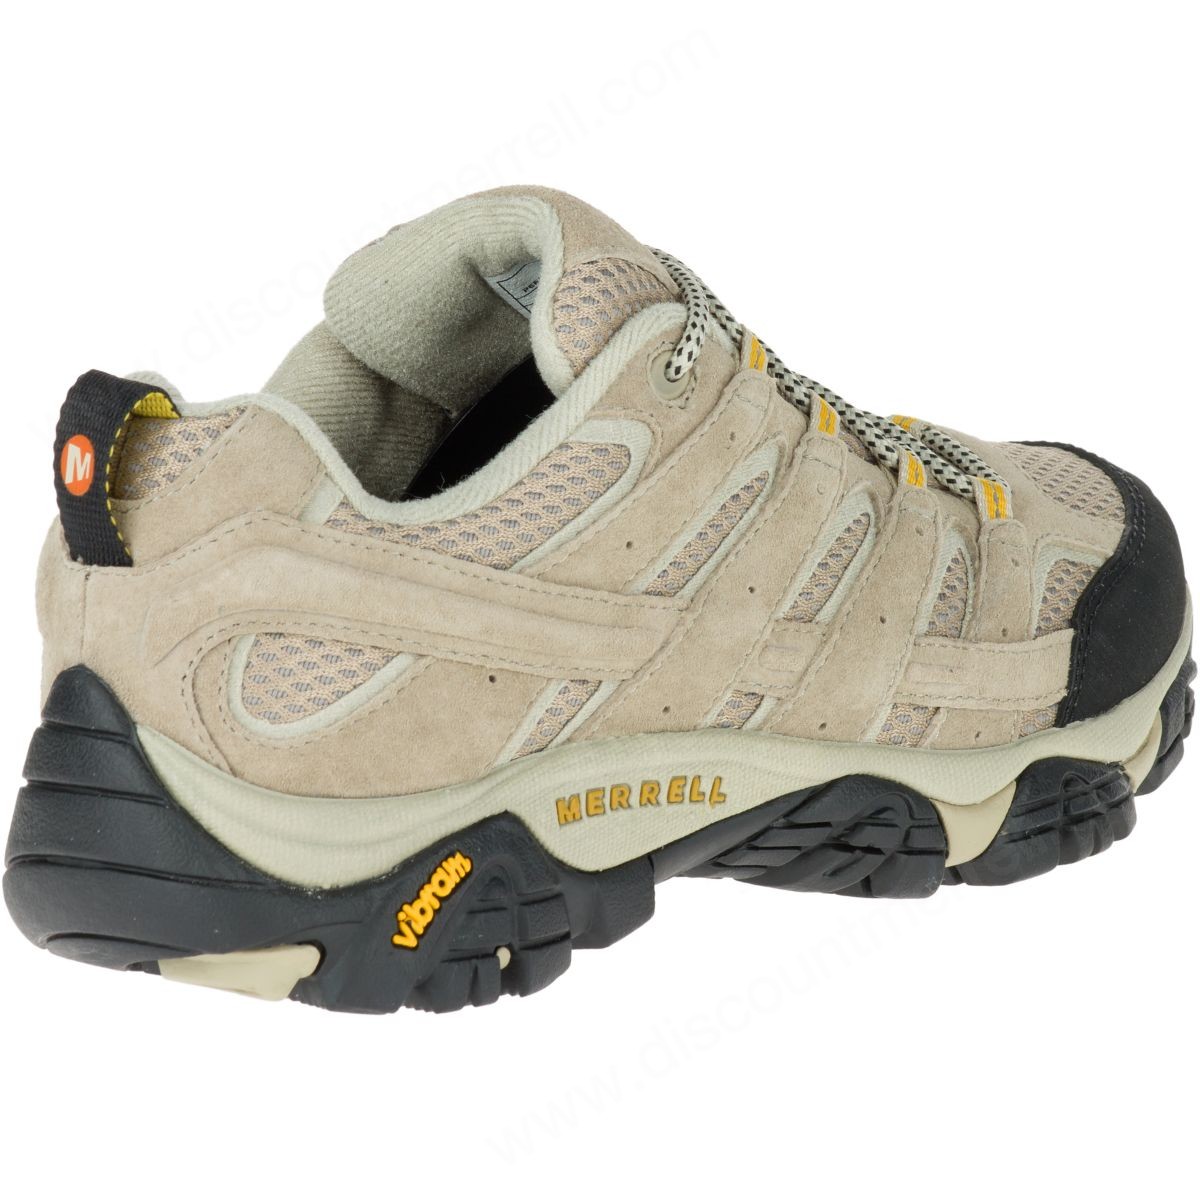 Merrell Woman's Moab Mother Of All Boots™ Ventilator Wide Width Taupe - -7